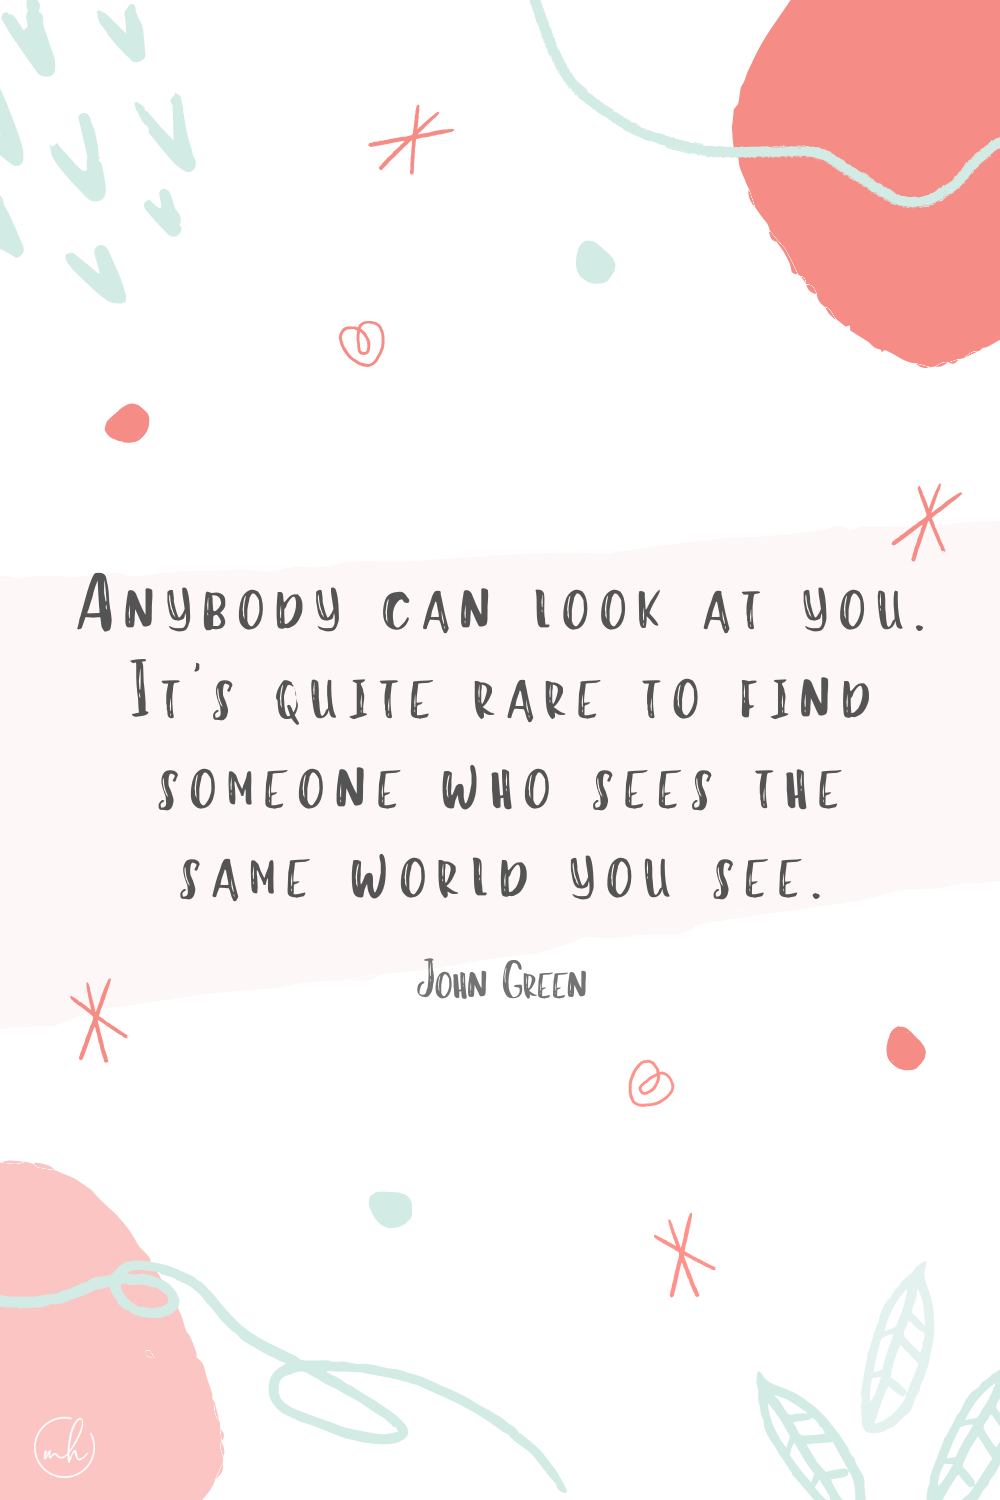 "Anybody can look at you. It’s quite rare to find someone who sees the same world you see." - John Green